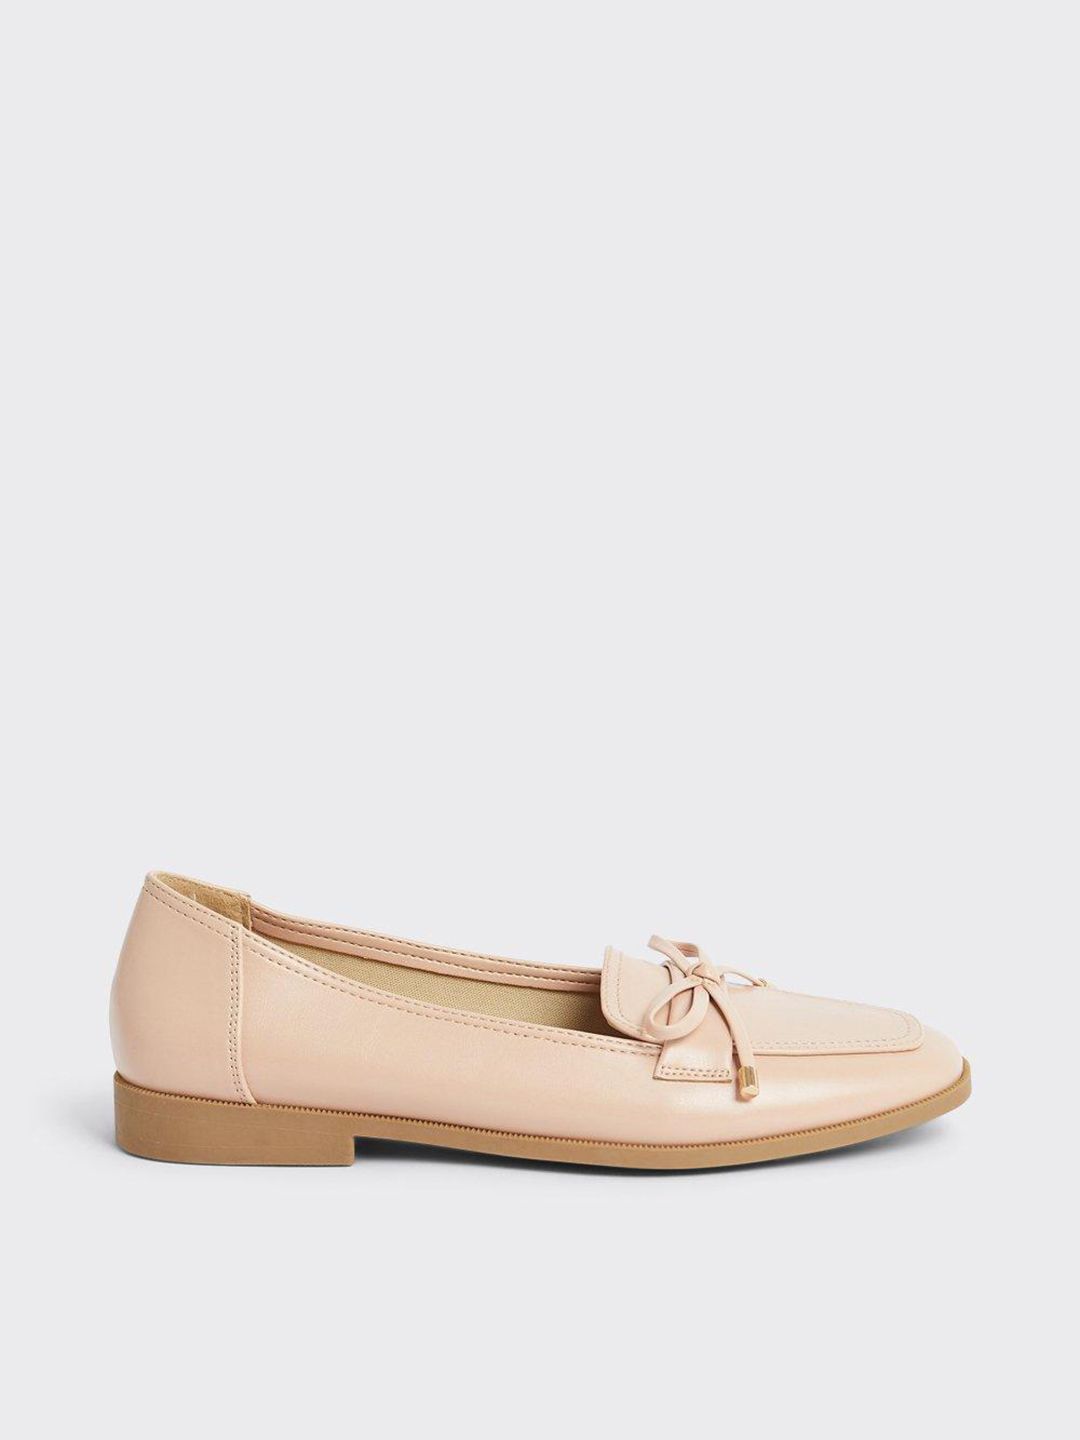 DOROTHY PERKINS Women Pink Bow Detail Loafers Price in India